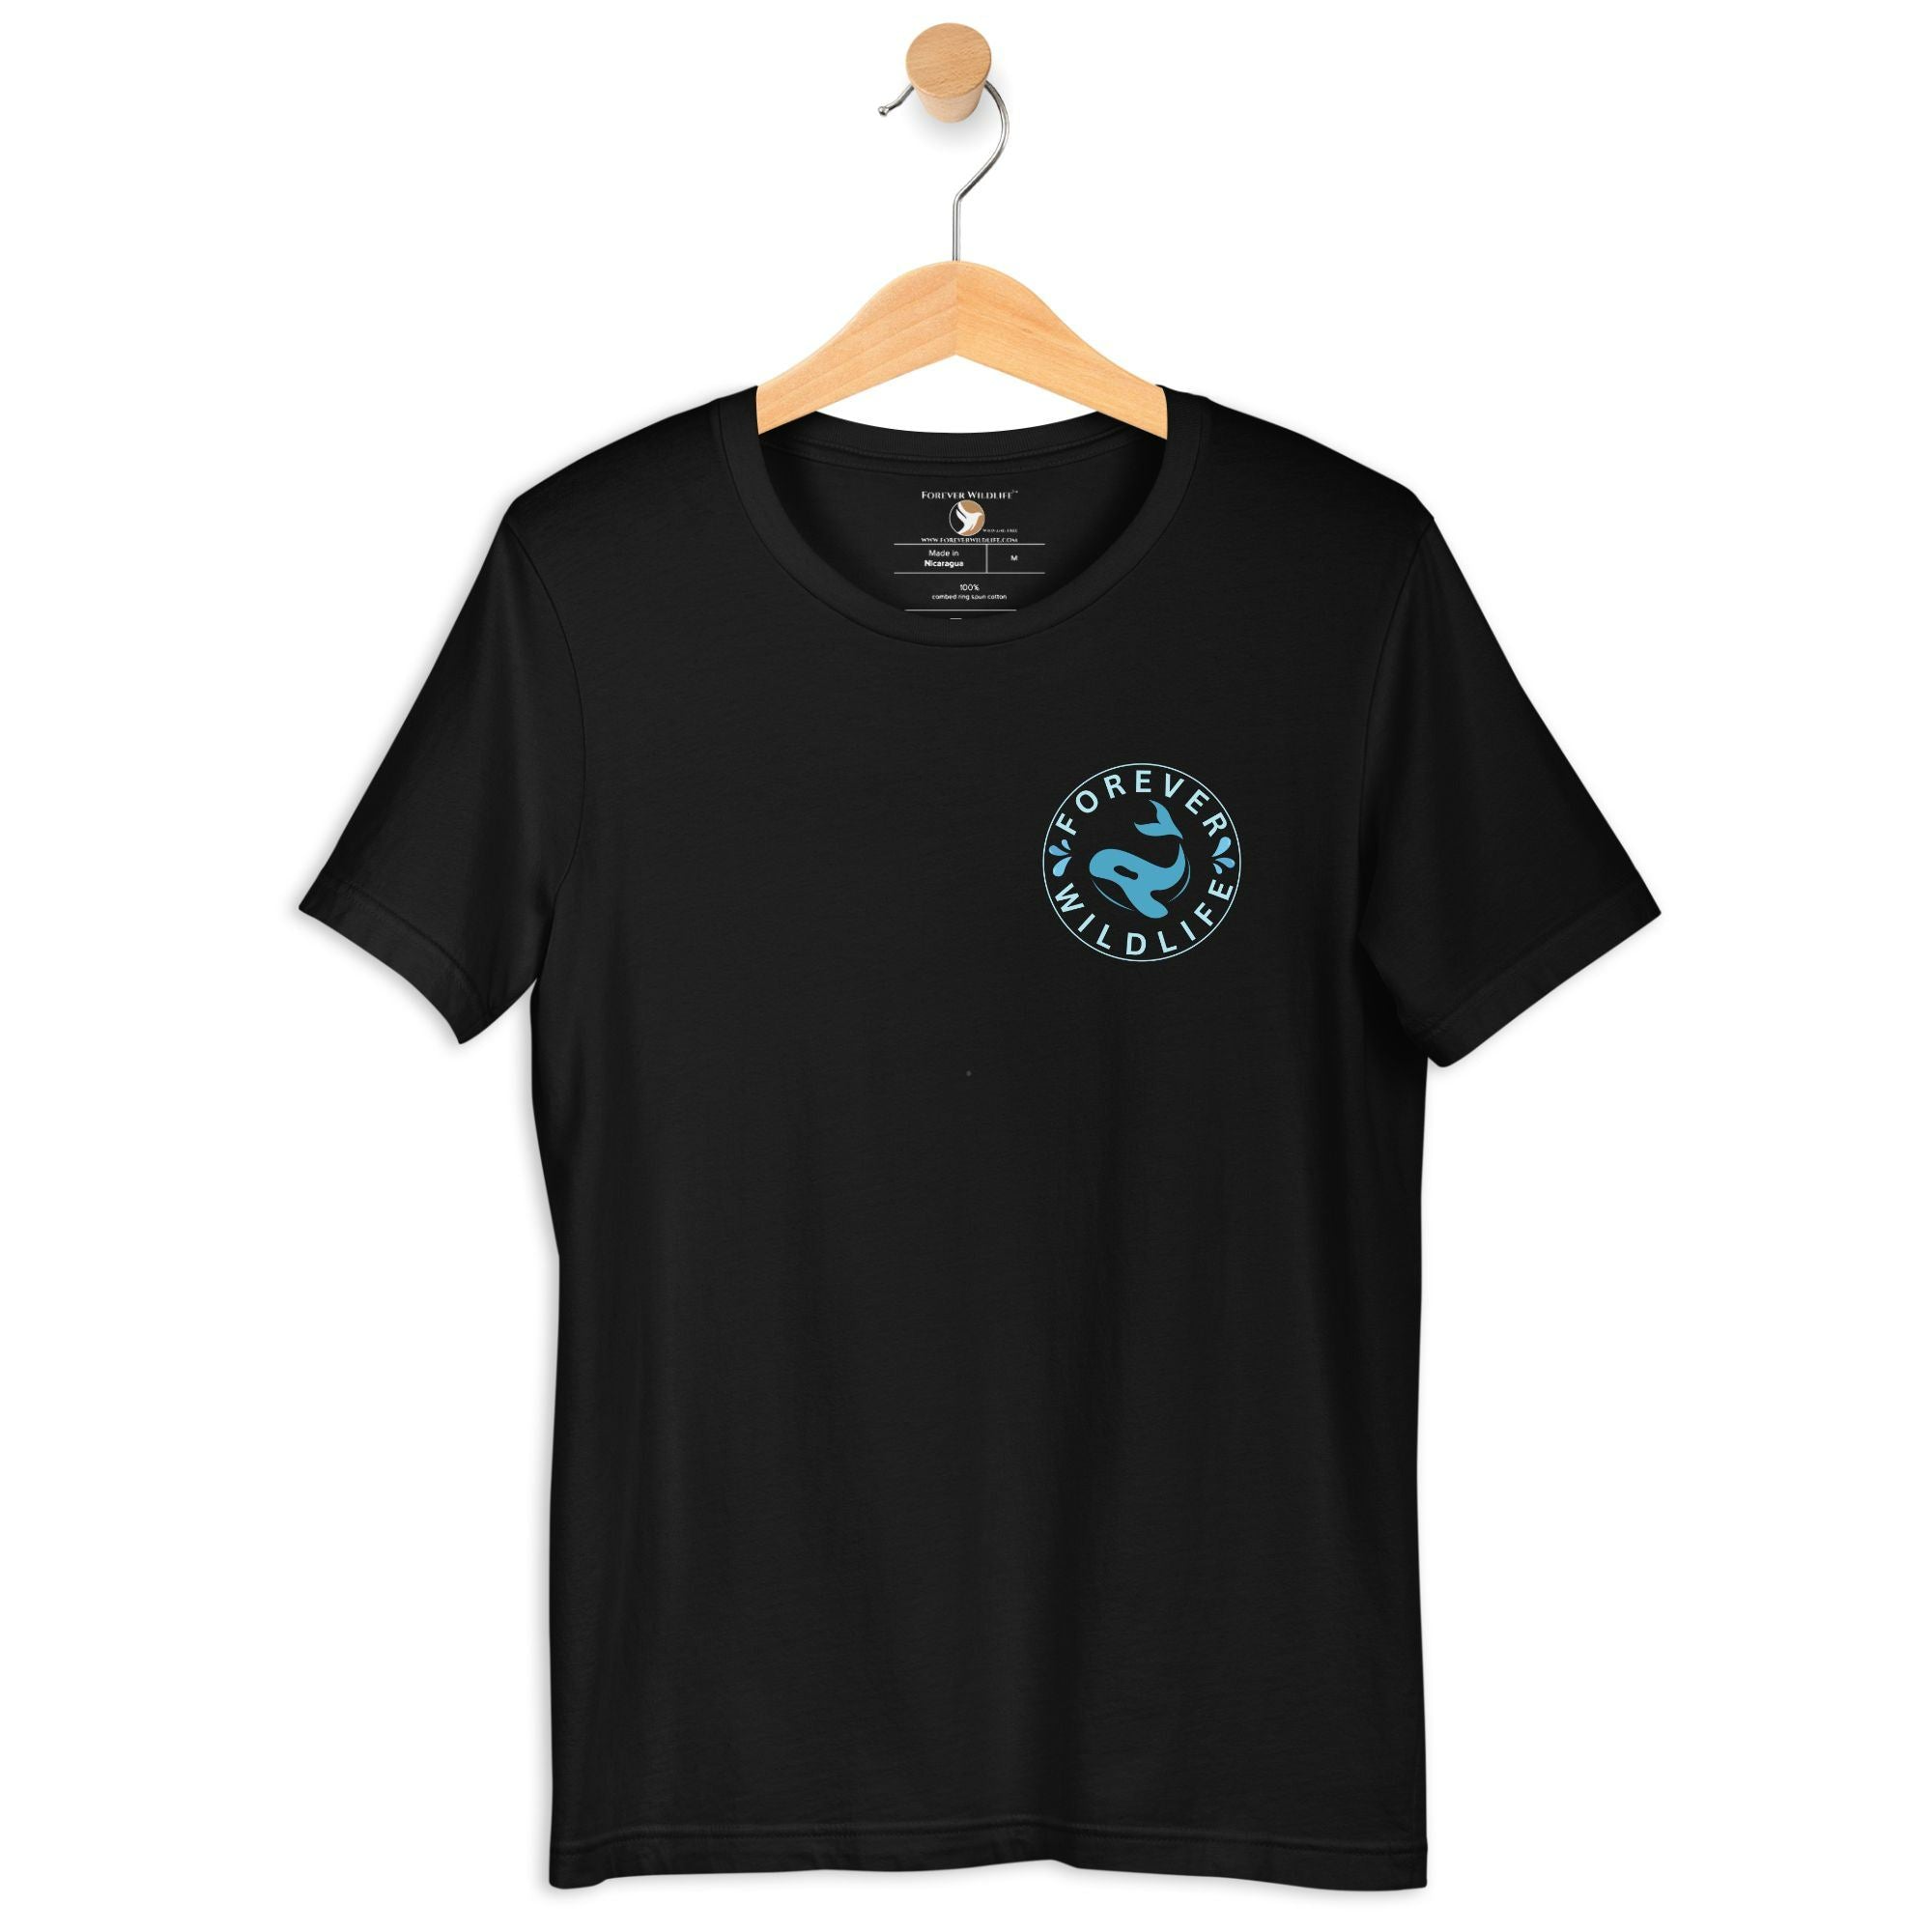 Orca Shirt, beautiful Black Orca T-Shirt with Killer Whales on the shirt by Forever Wildlife selling Wildlife T Shirts.